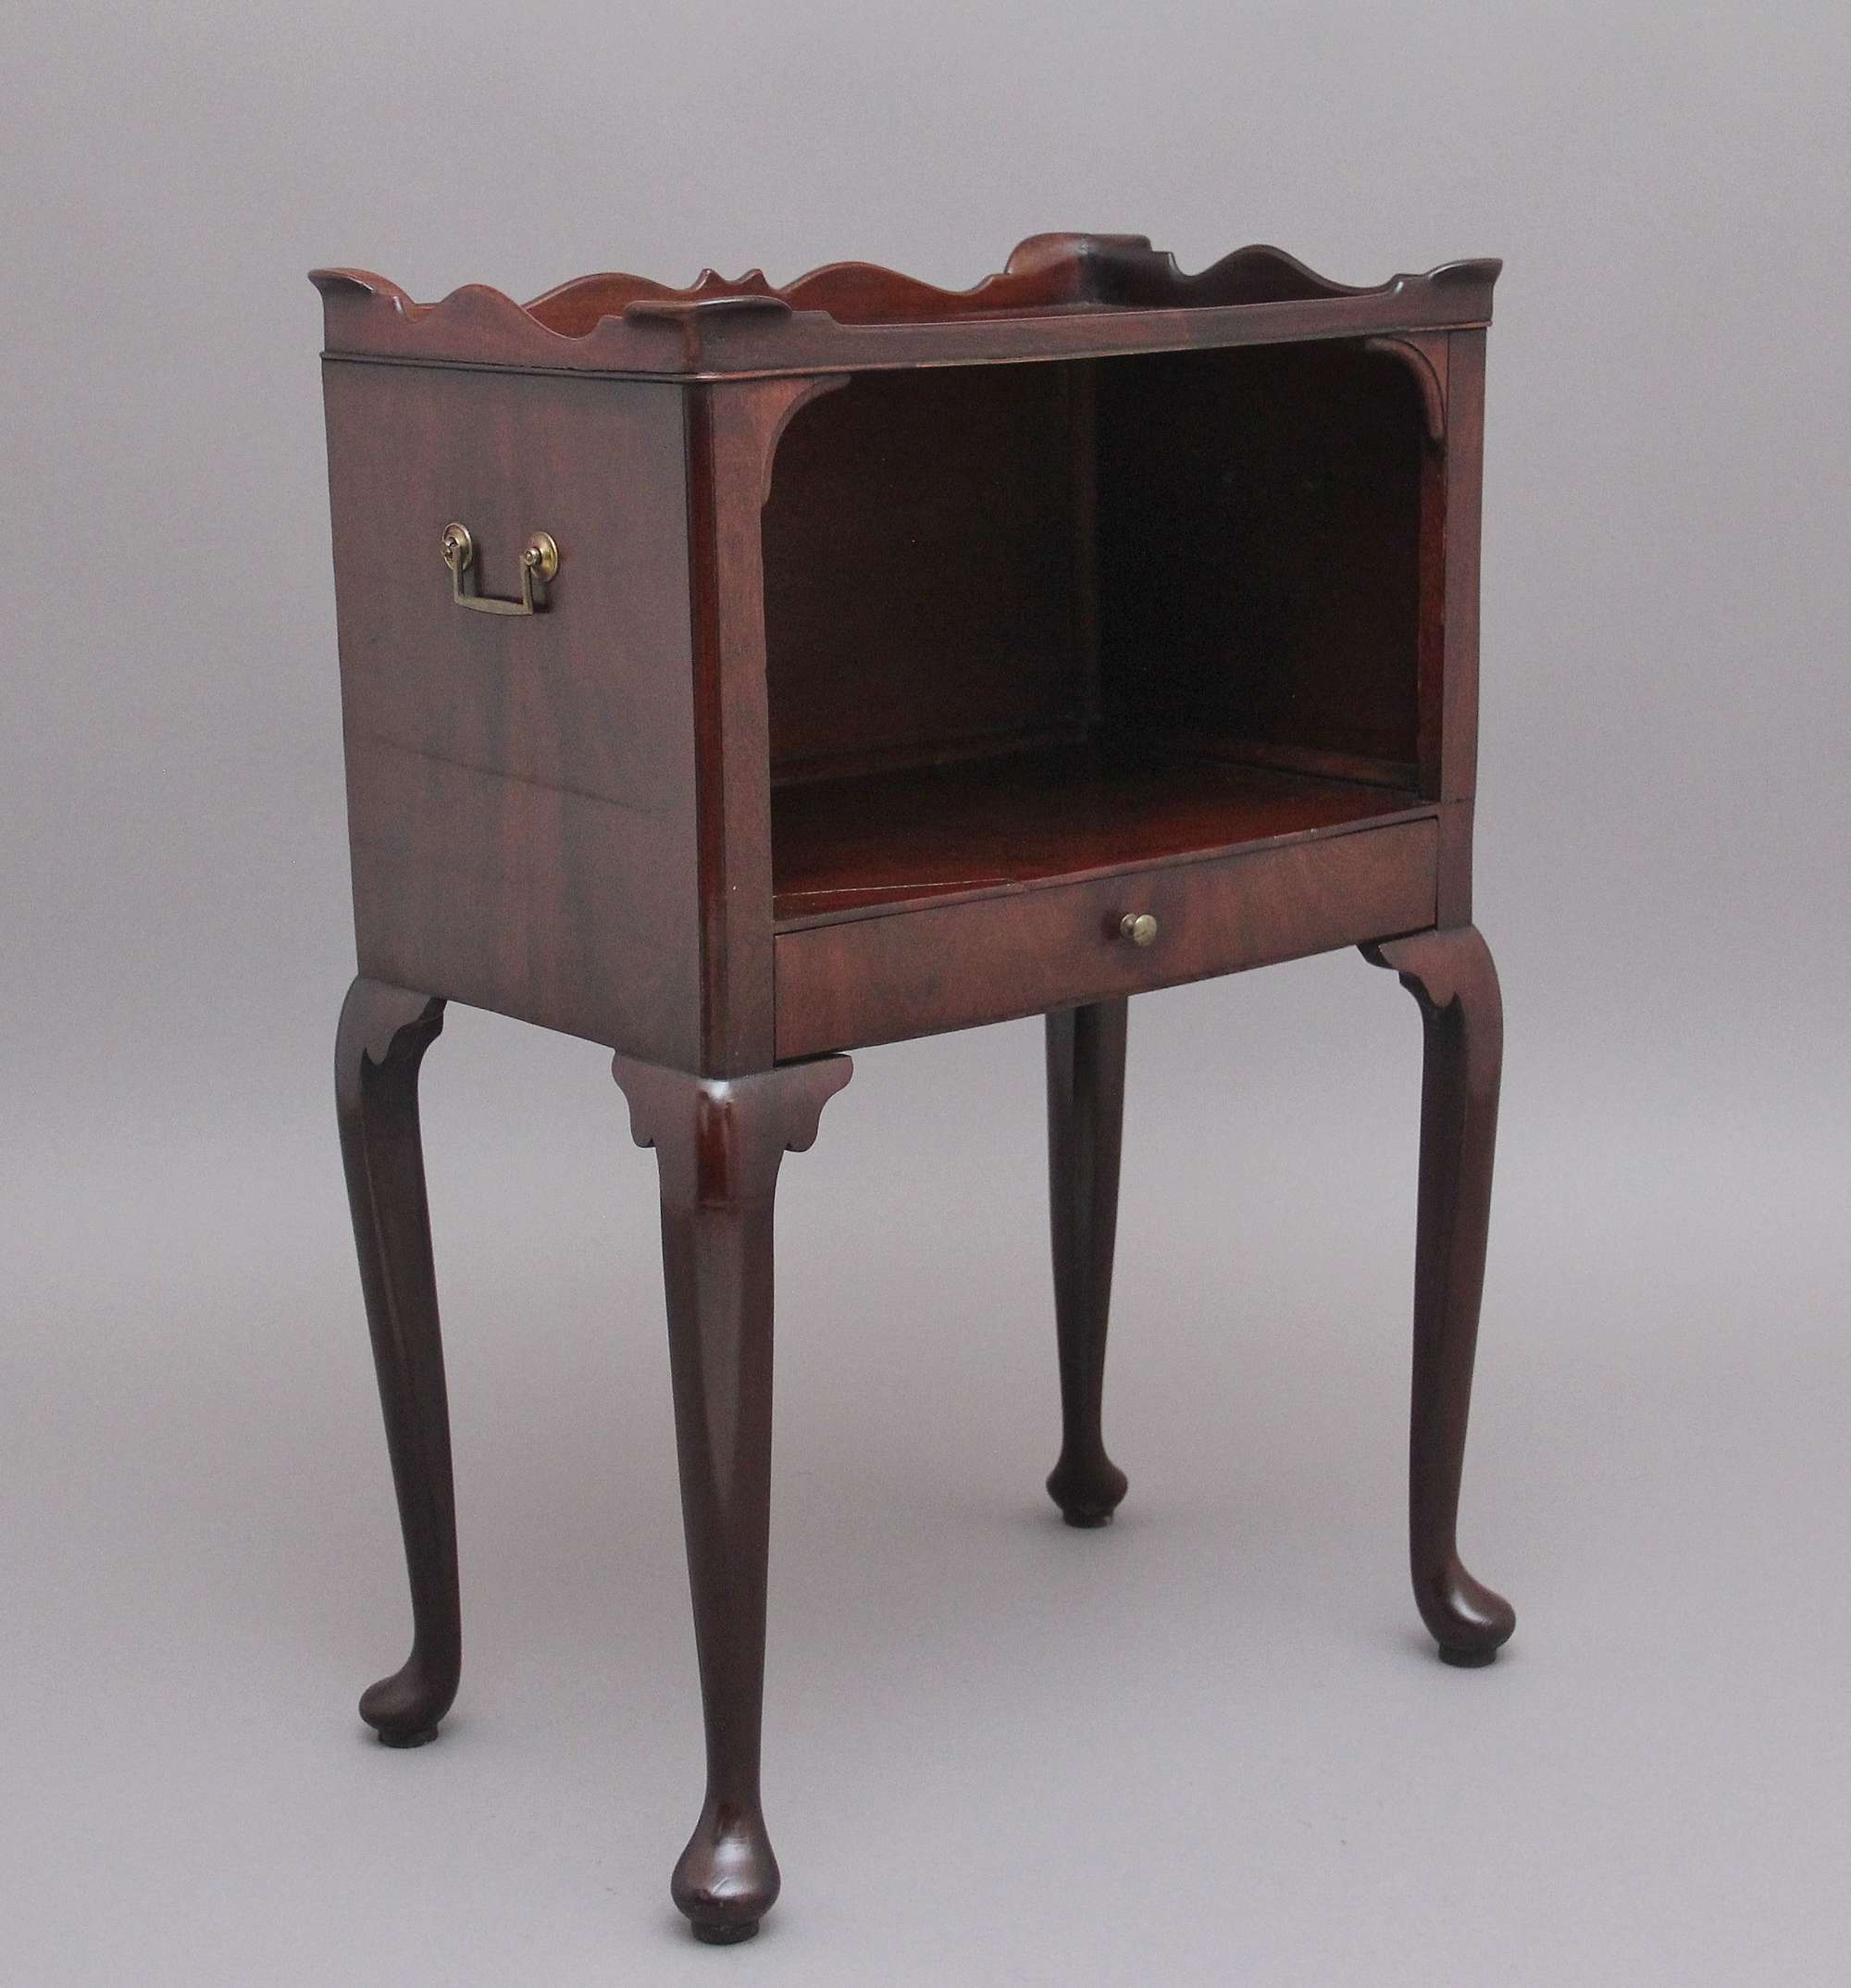 Early 20th Century Mahogany Antique Bedside Cabinet In The Georgian Style